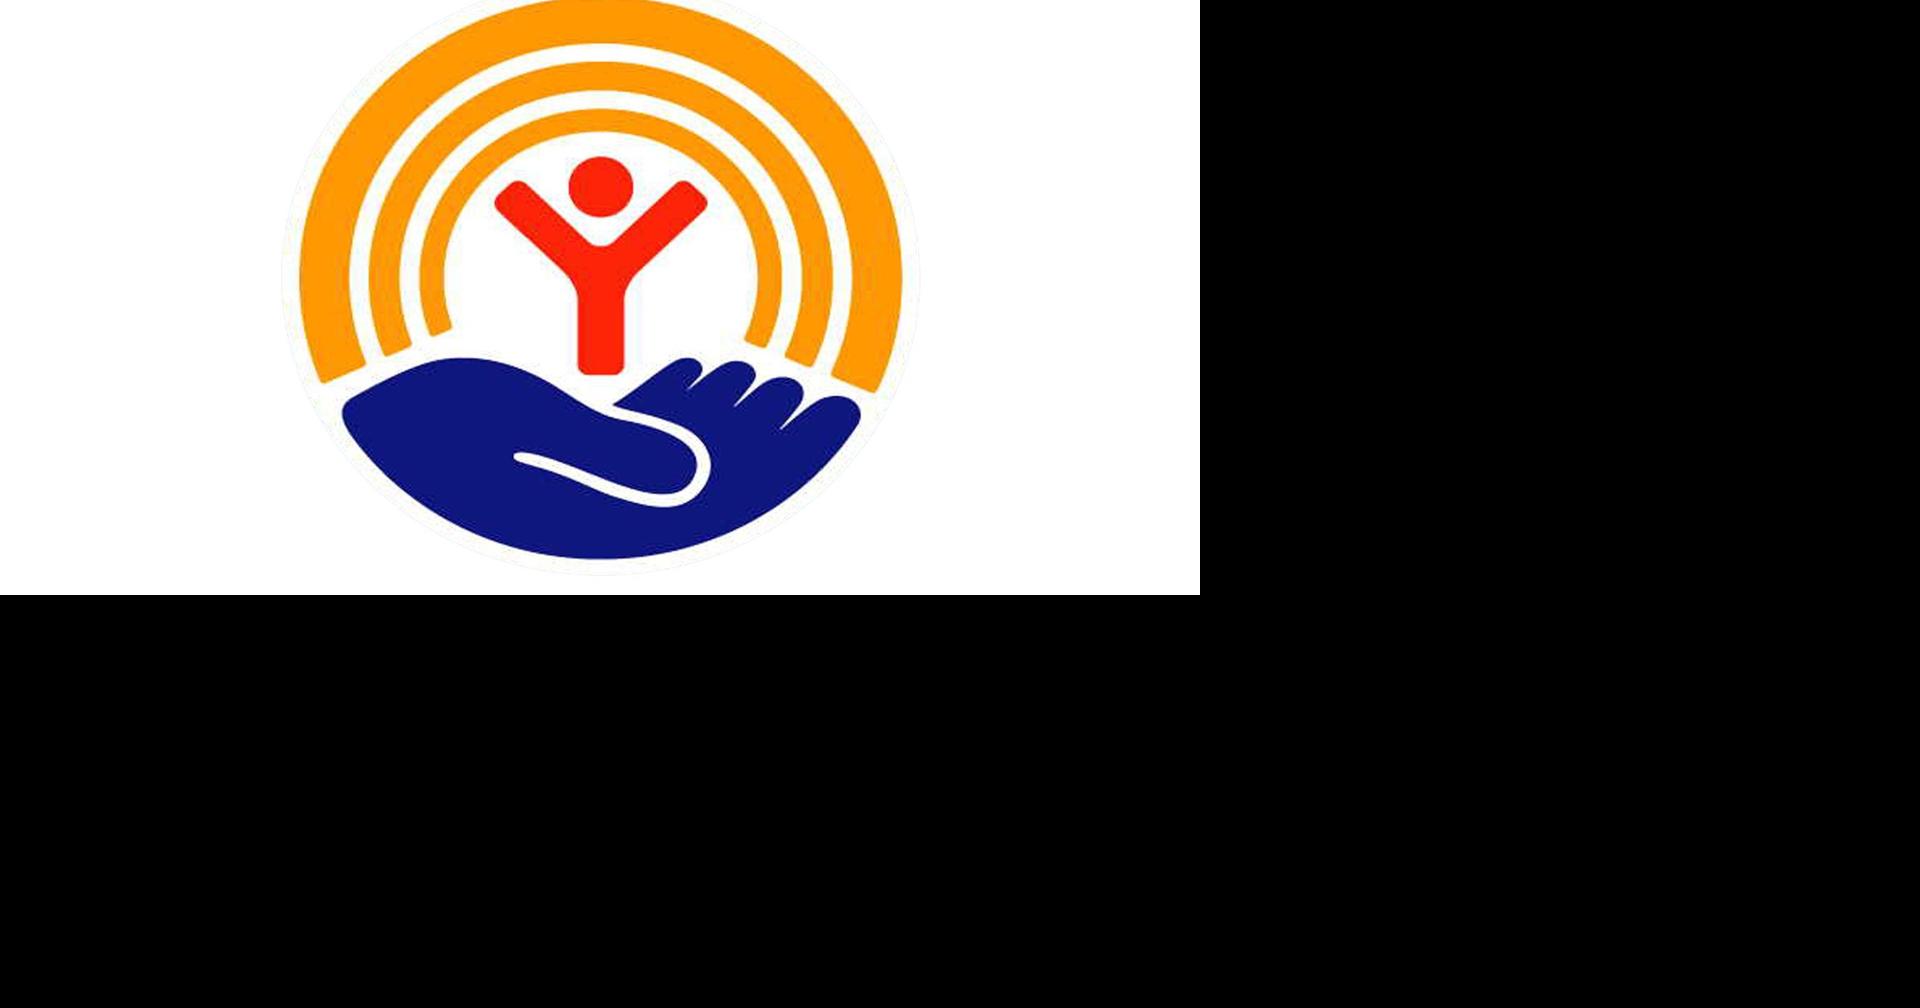 United Way of Rhode Island makes $3 million available to local nonprofits